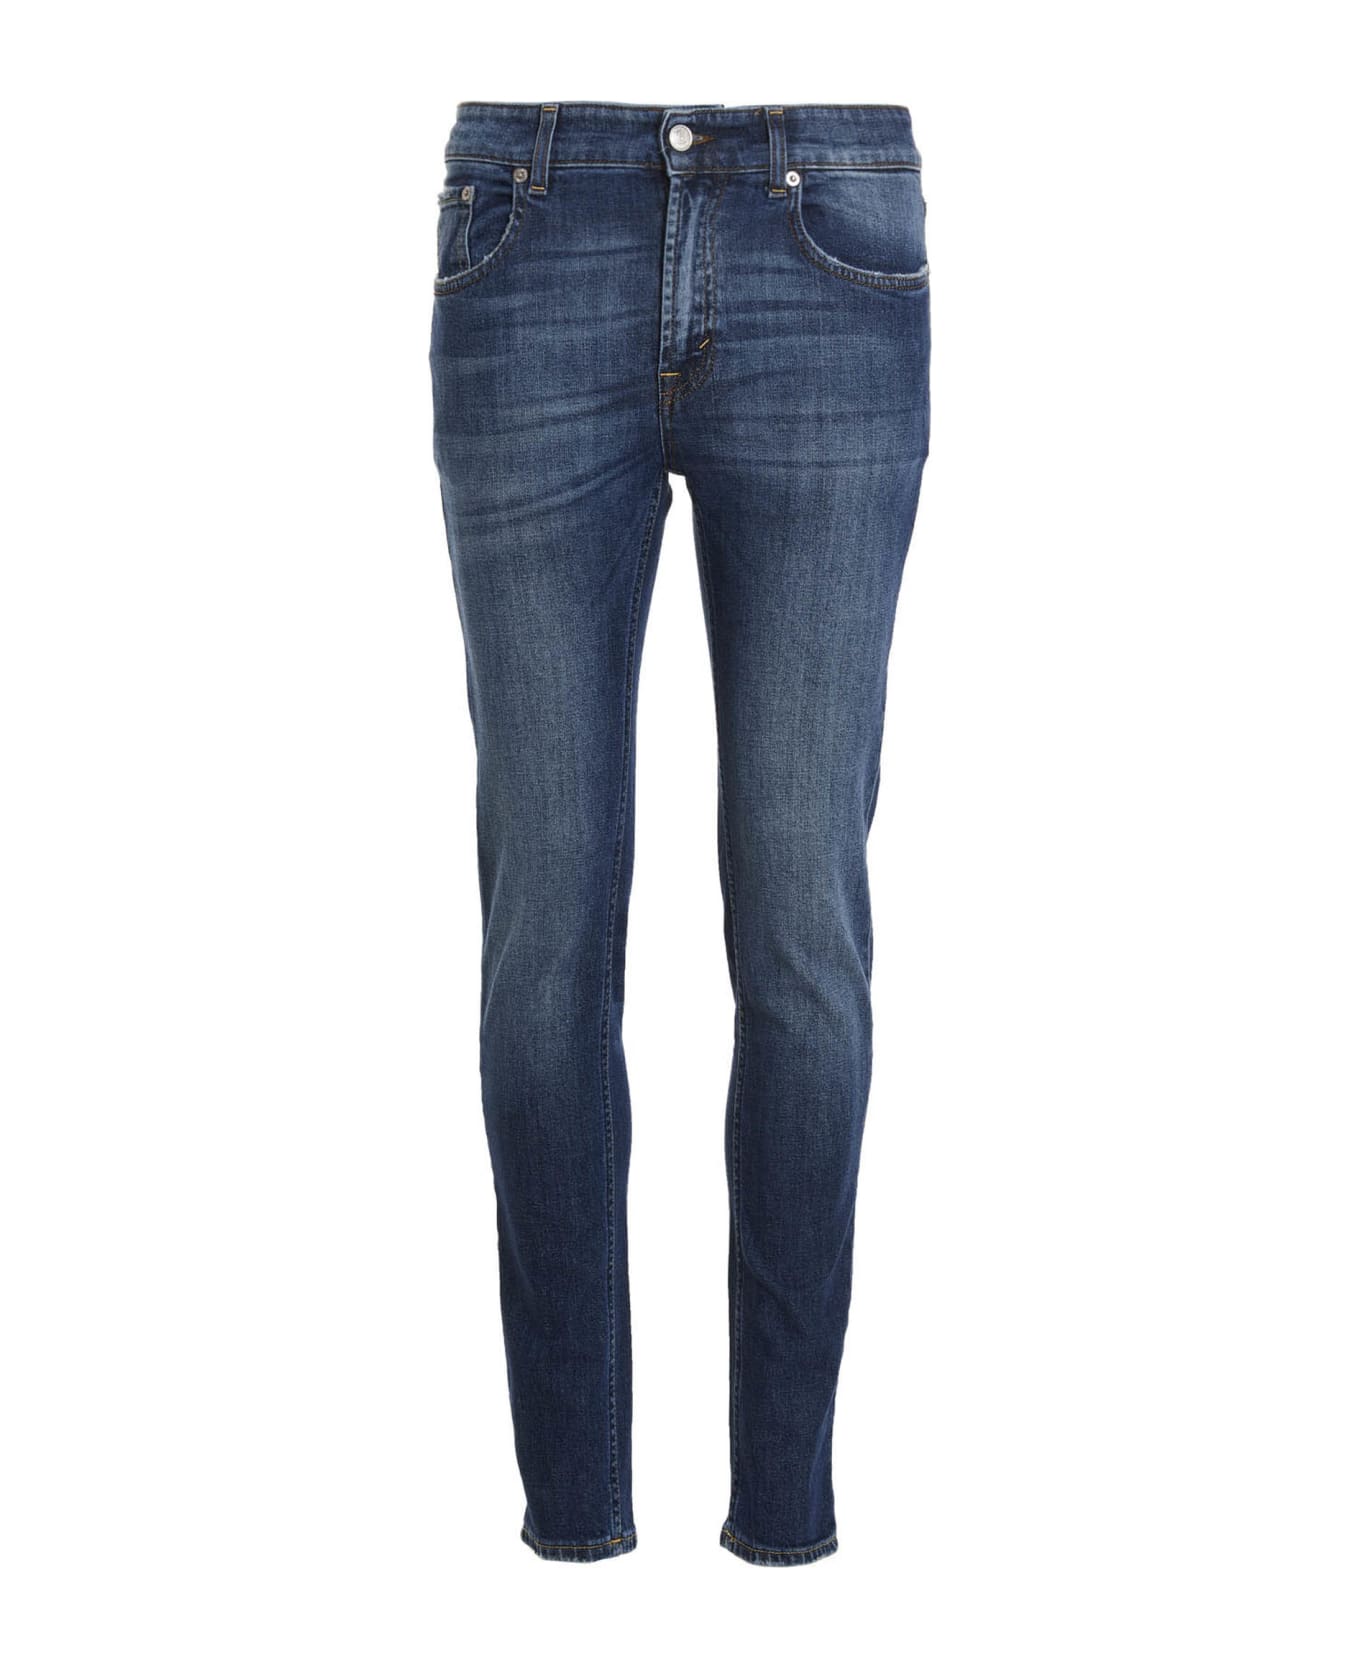 Department Five 'skeith Jeans - Blue